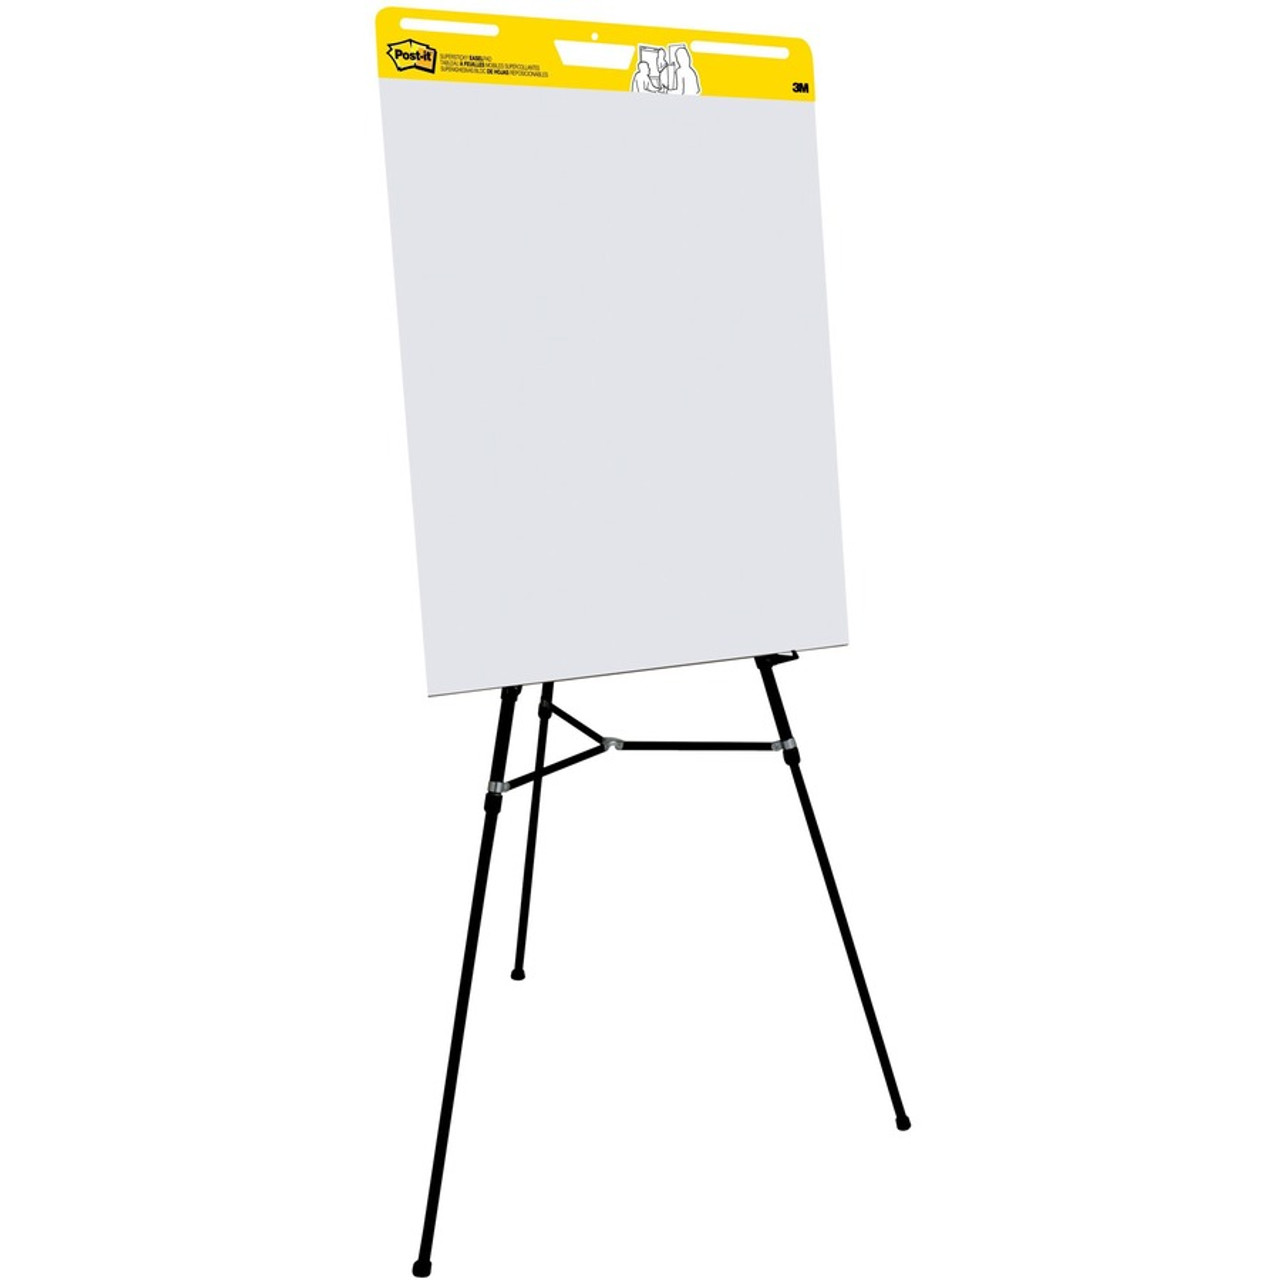 Vertical-Orientation Self-Stick Easel Pad Value Pack by Post-it® Easel Pads  Super Sticky MMM561VAD4PK